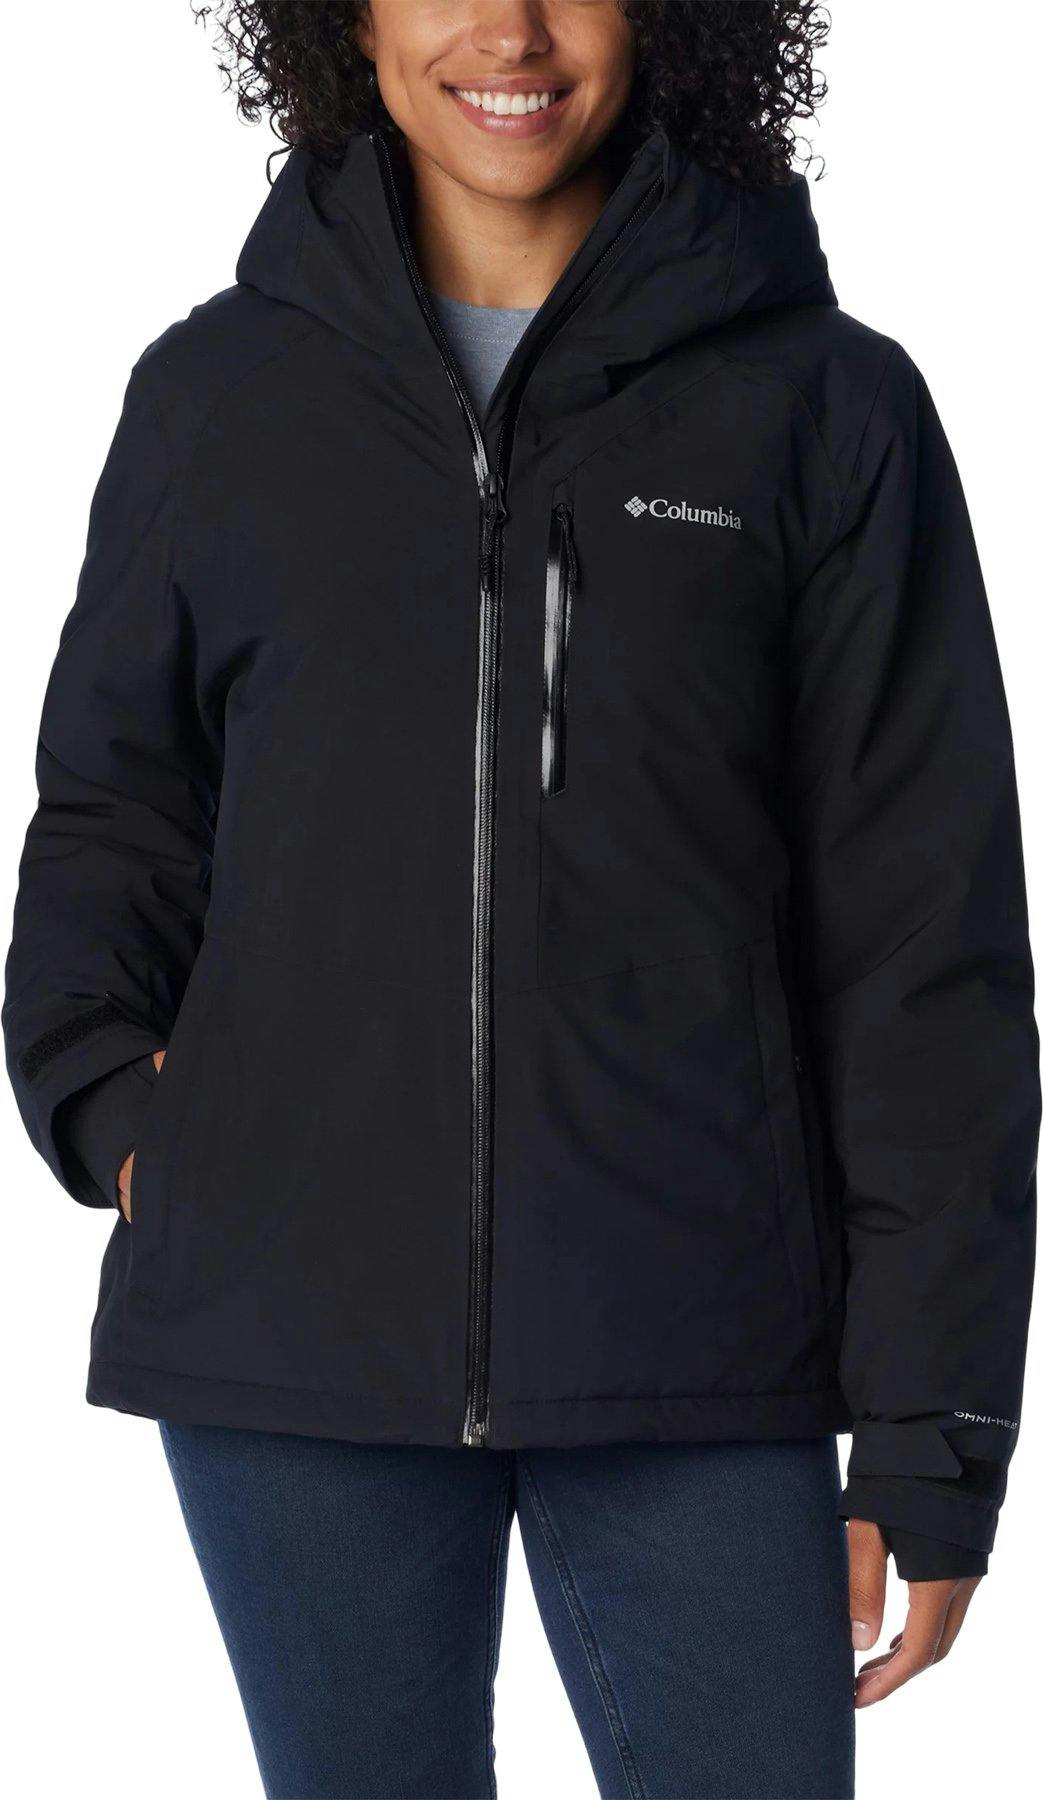 Product image for Explorer's Edge Insulated Jacket - Women's